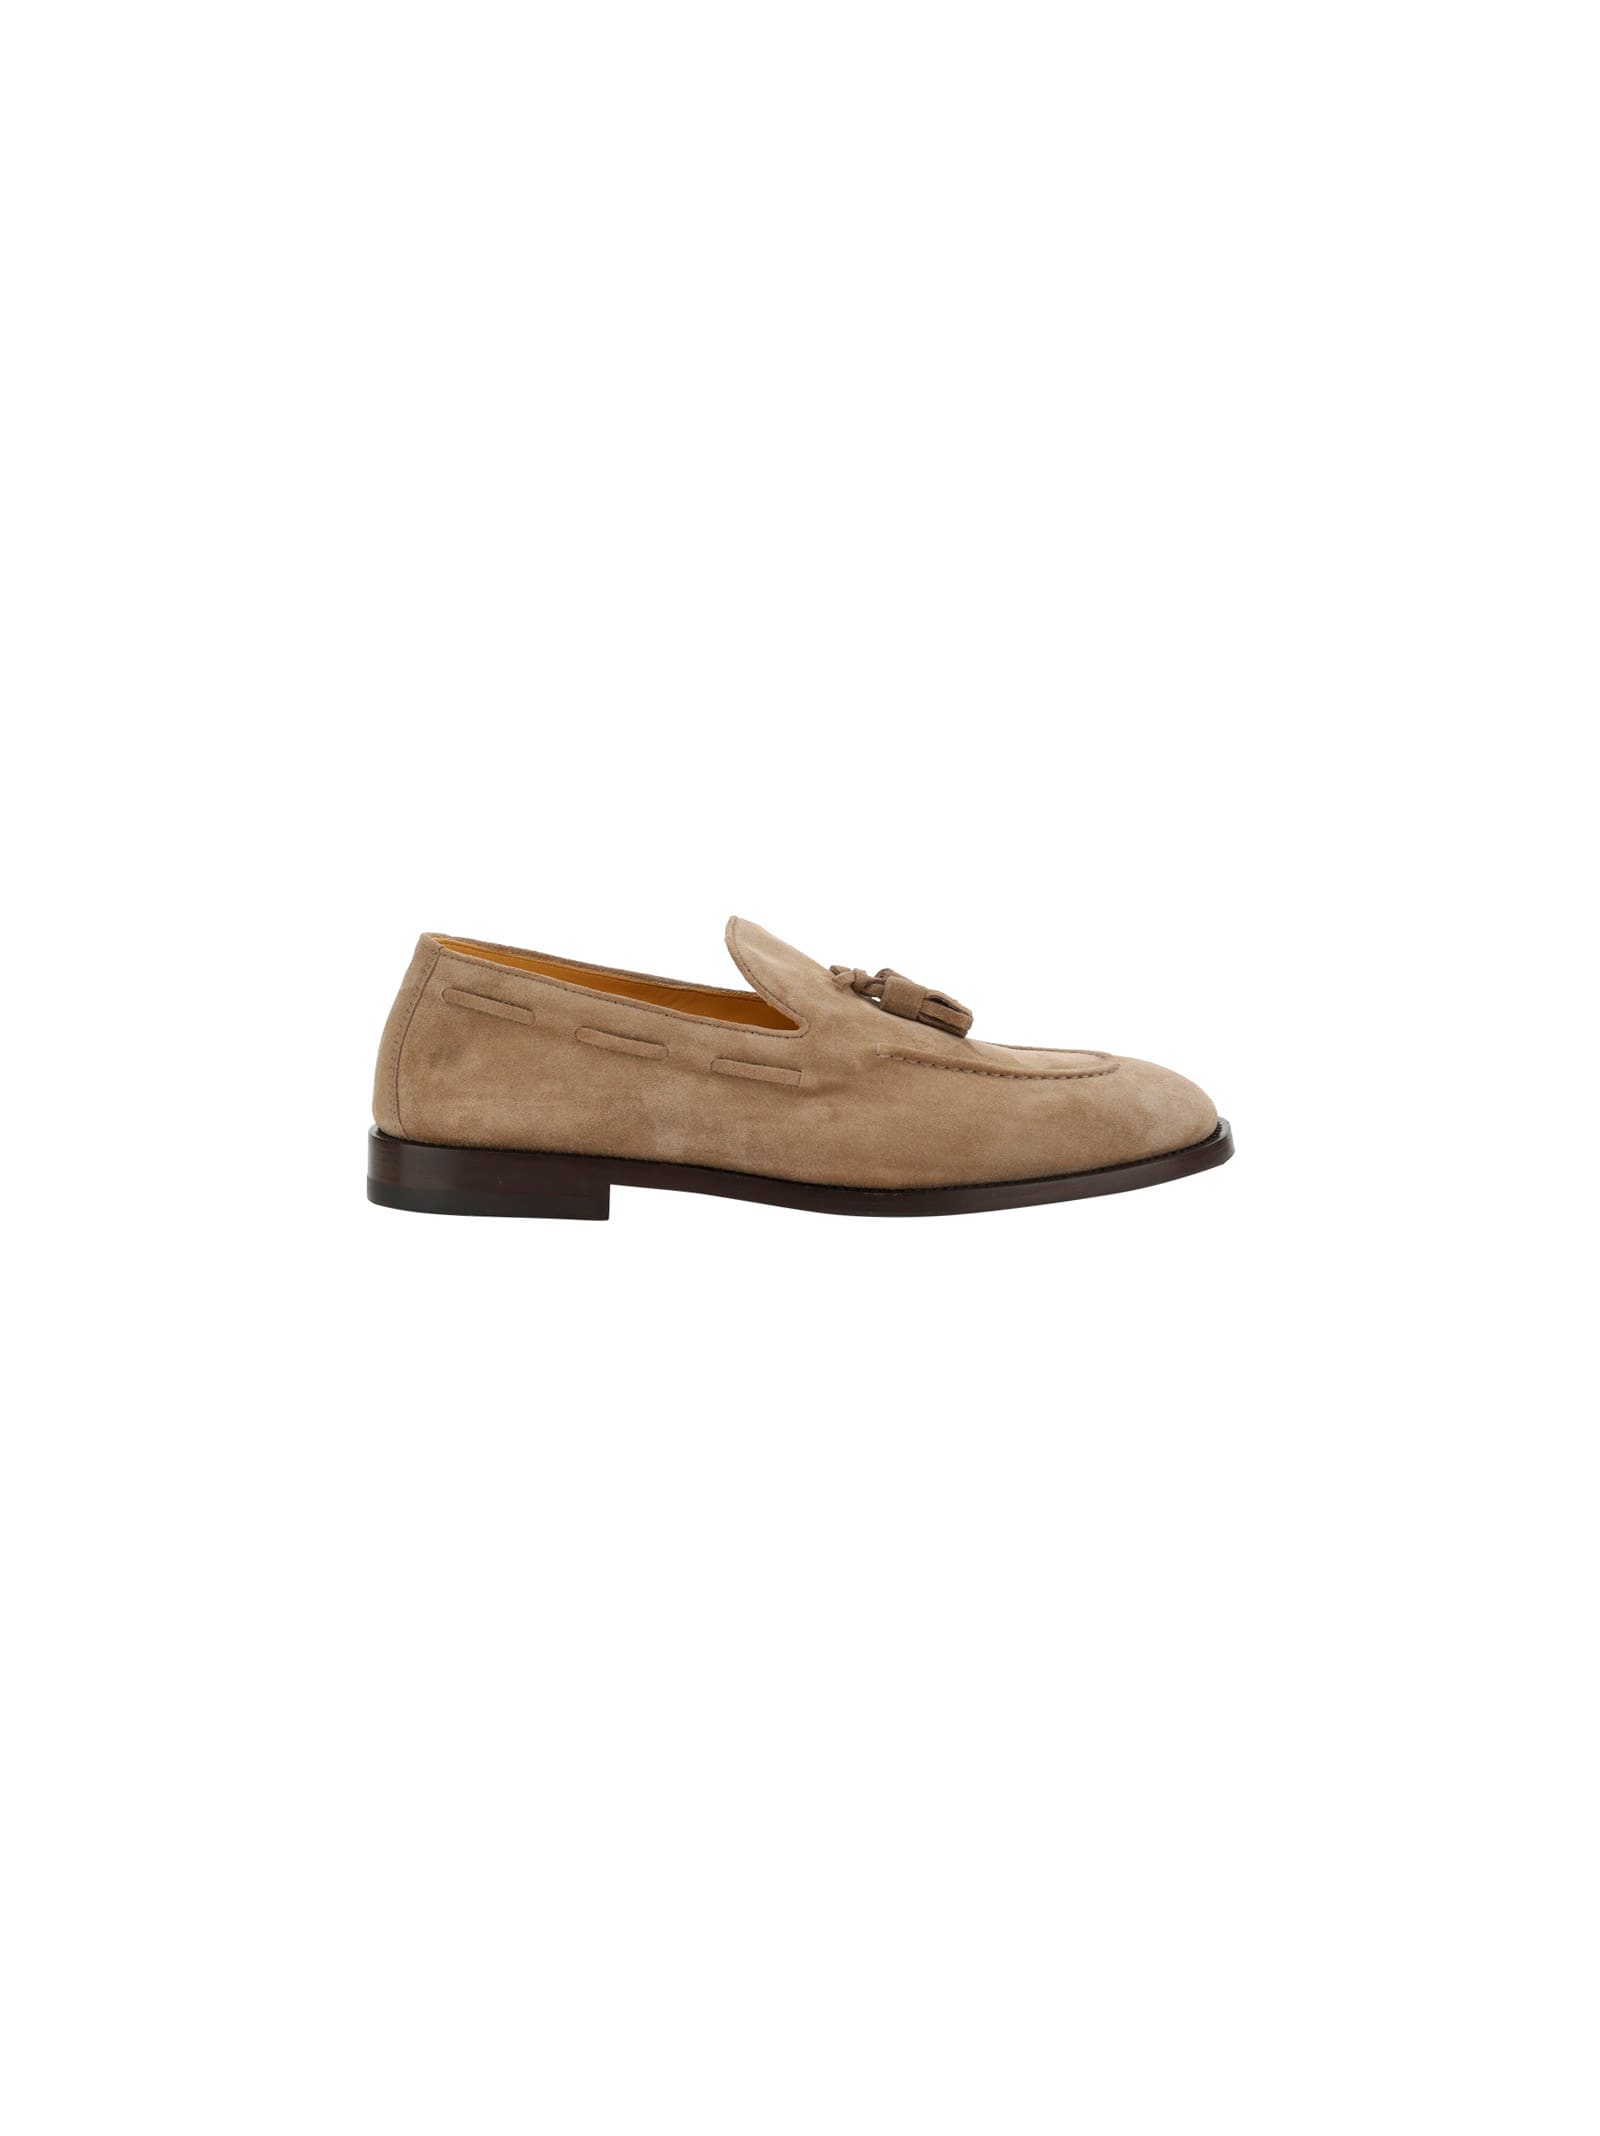 Brunello Cucinelli Loafer Shoes